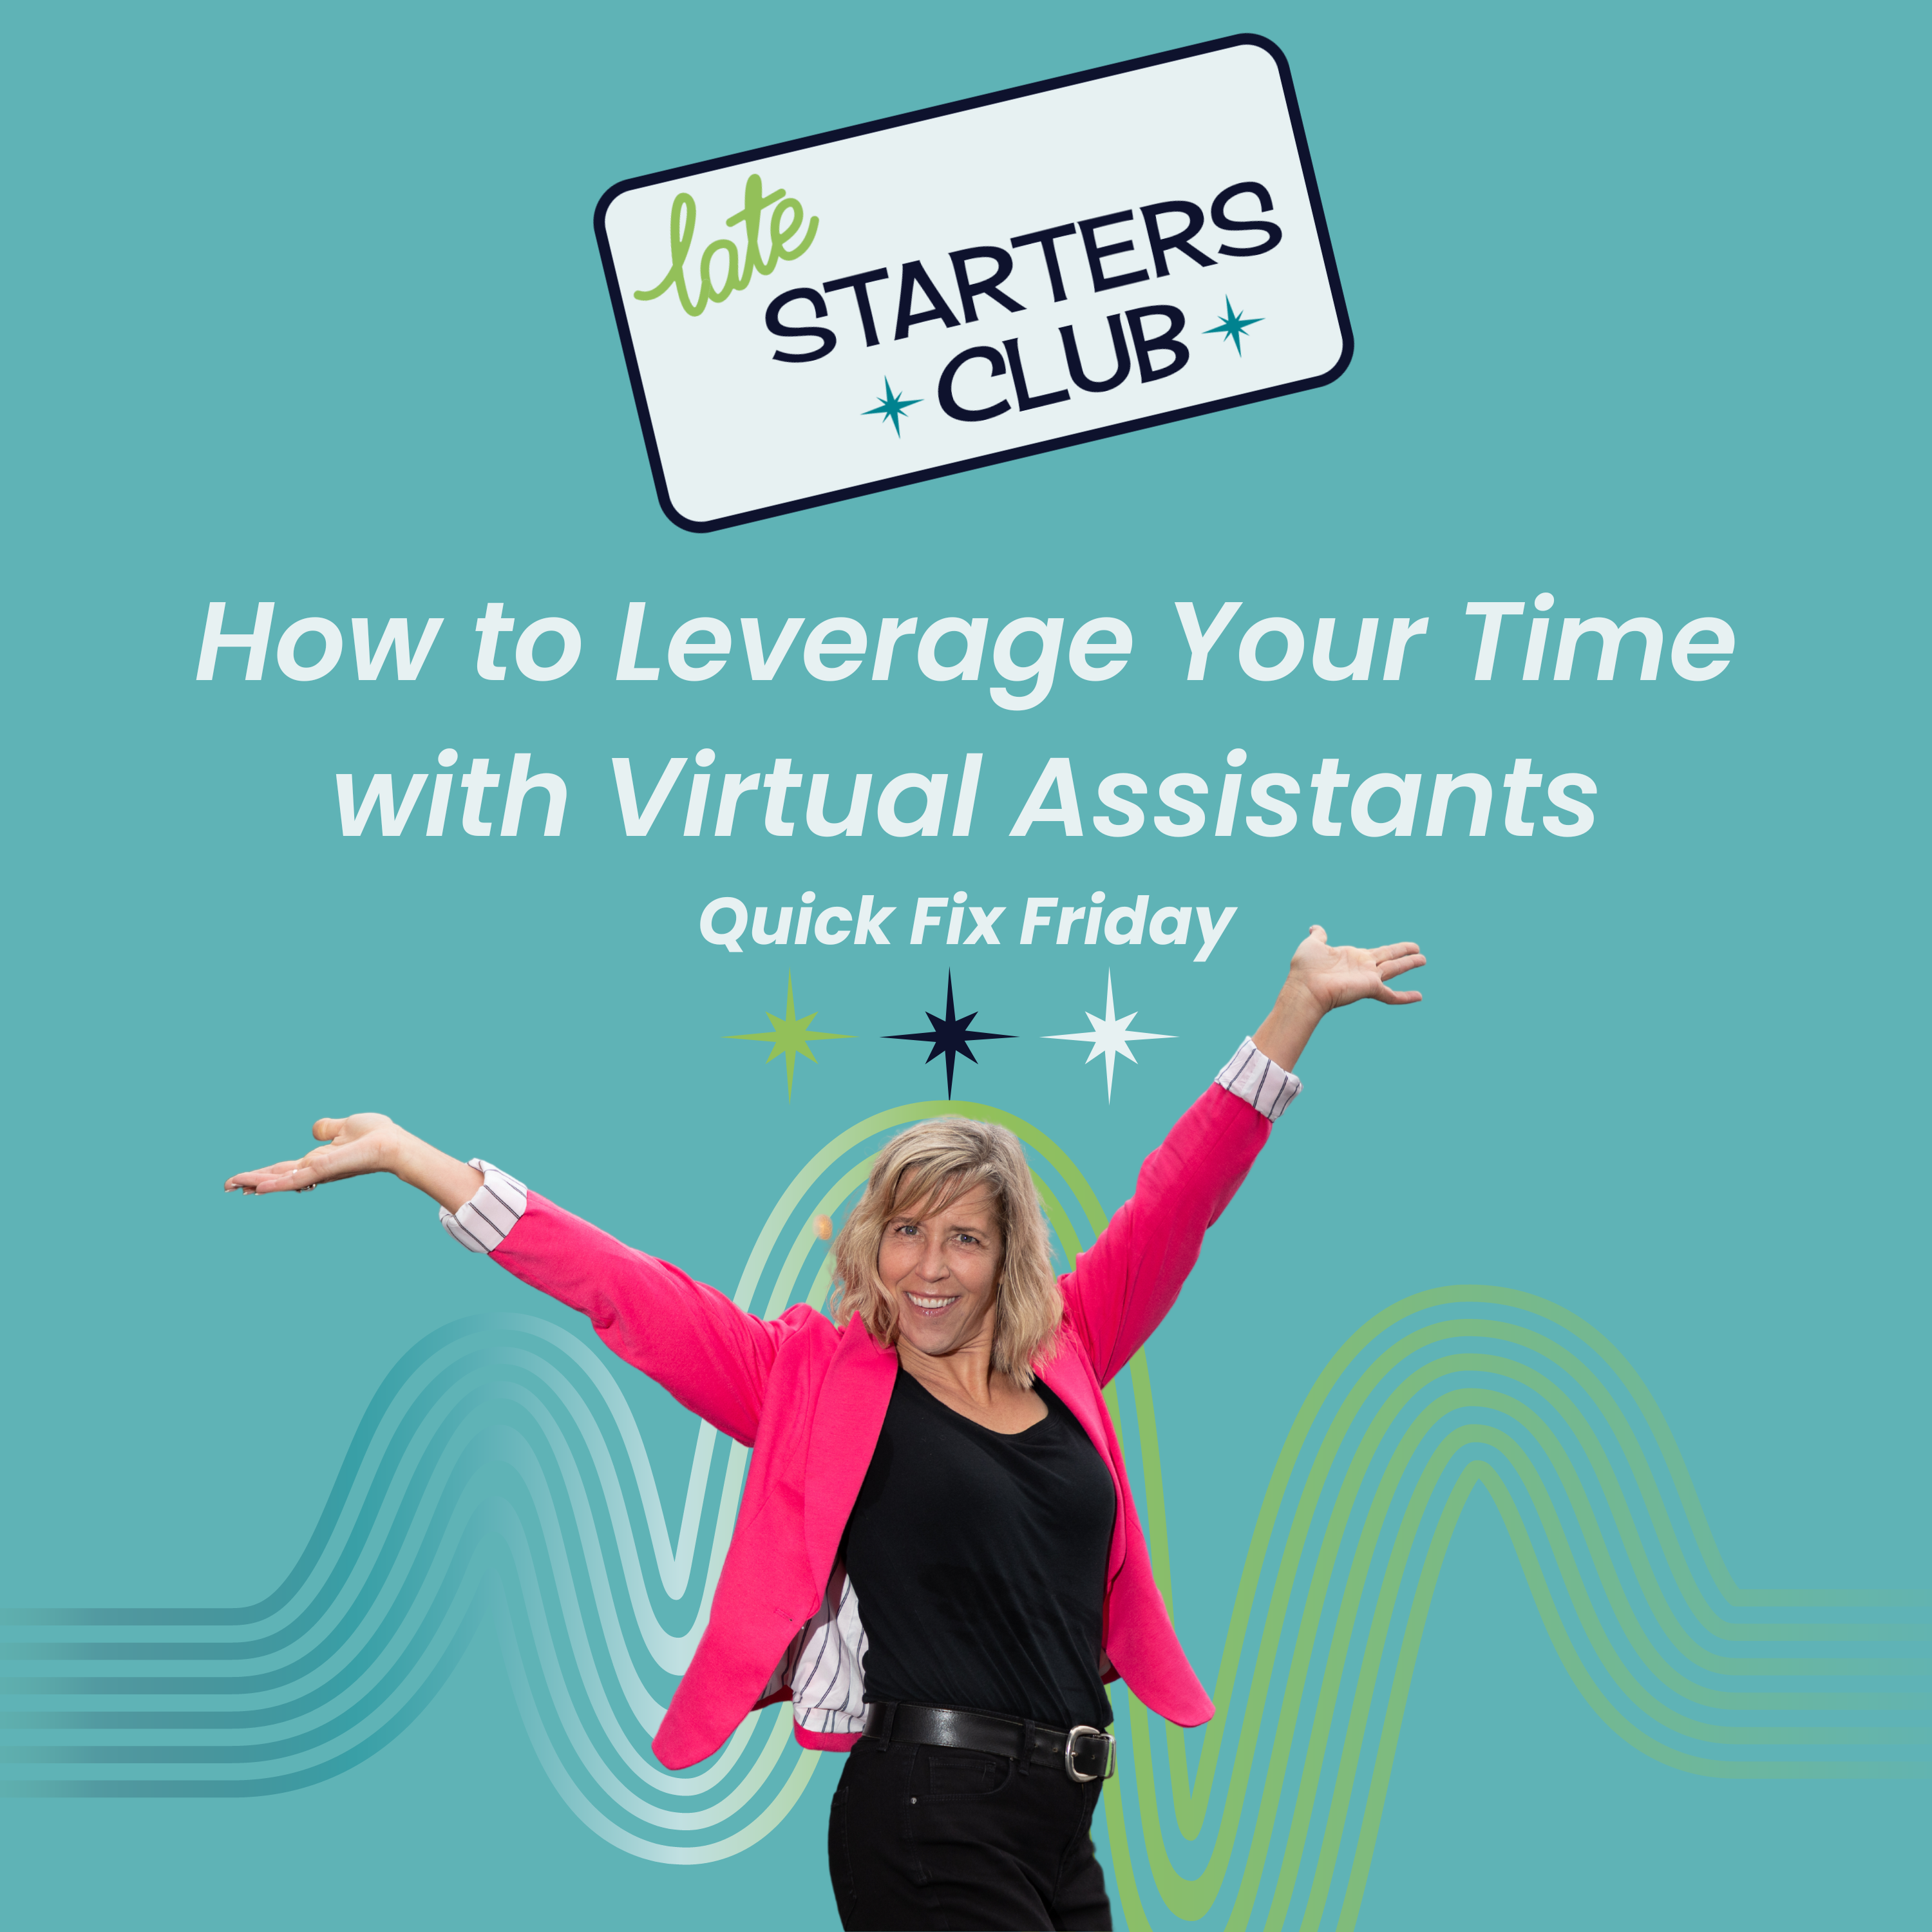 39: How to Leverage Your Time with Virtual Assistants – Quick Fix Friday